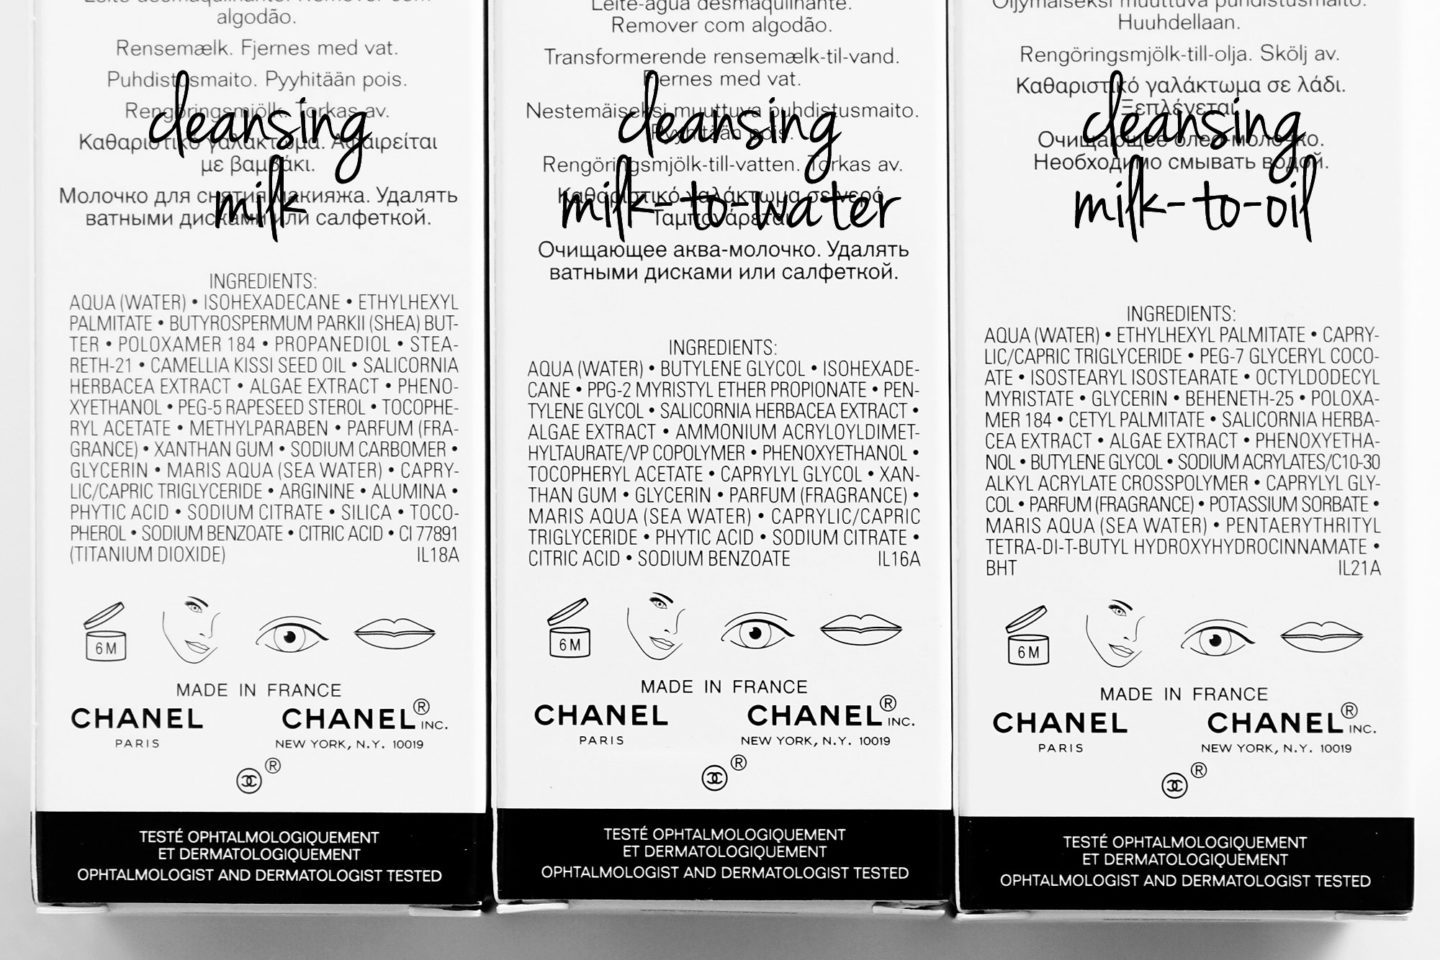 Chanel Cleansing Collection Ingredients